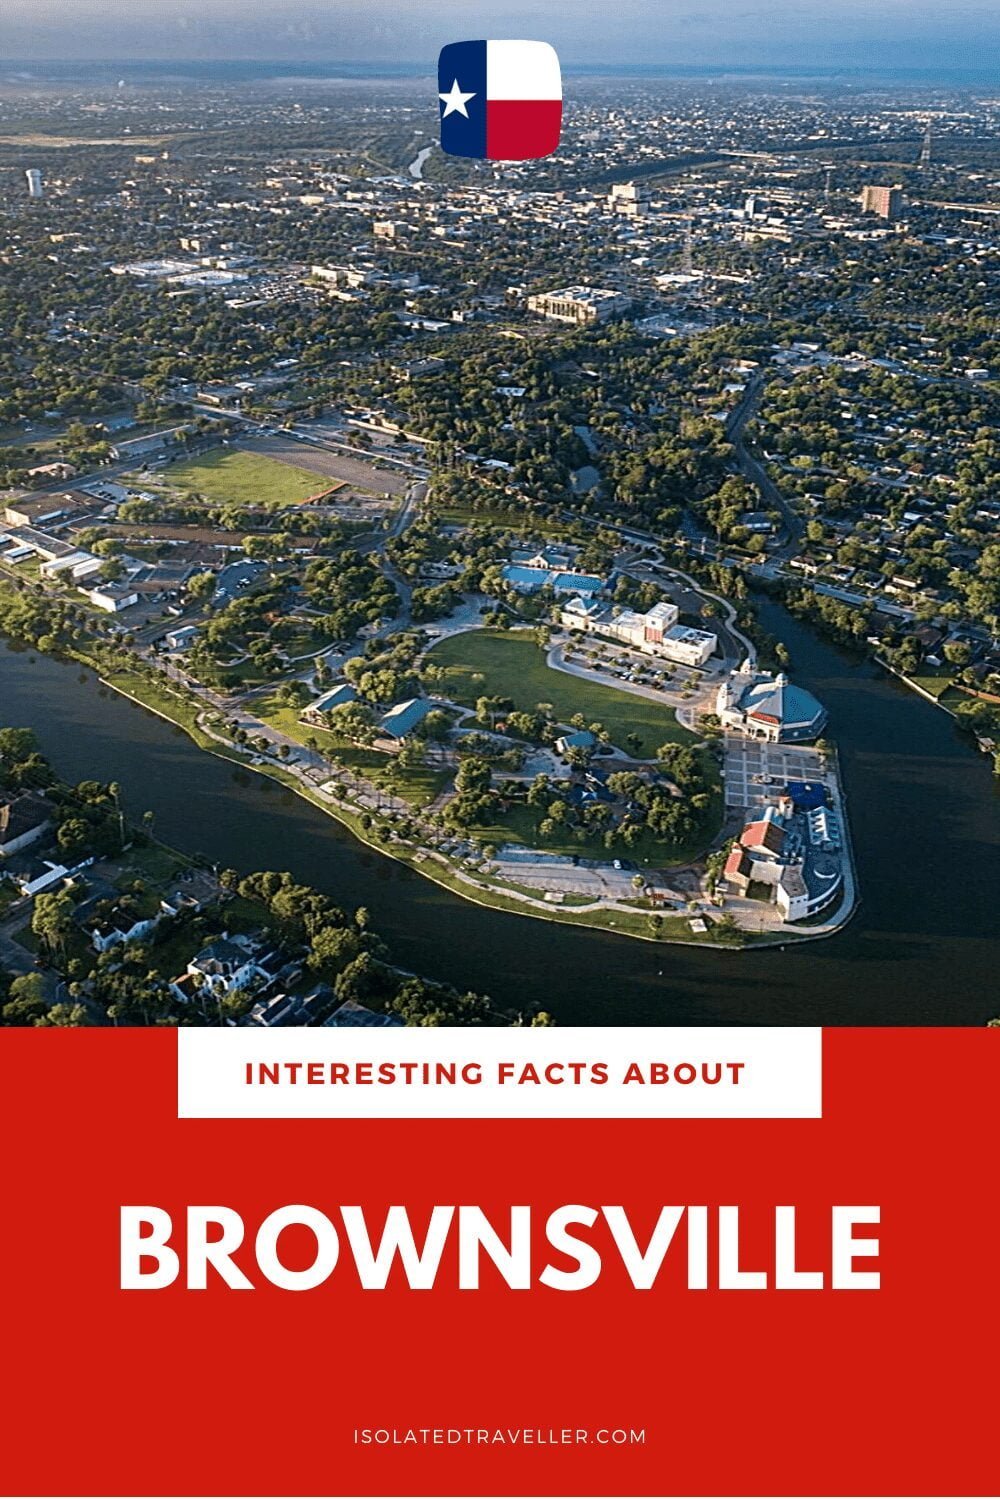 Facts About Brownsville